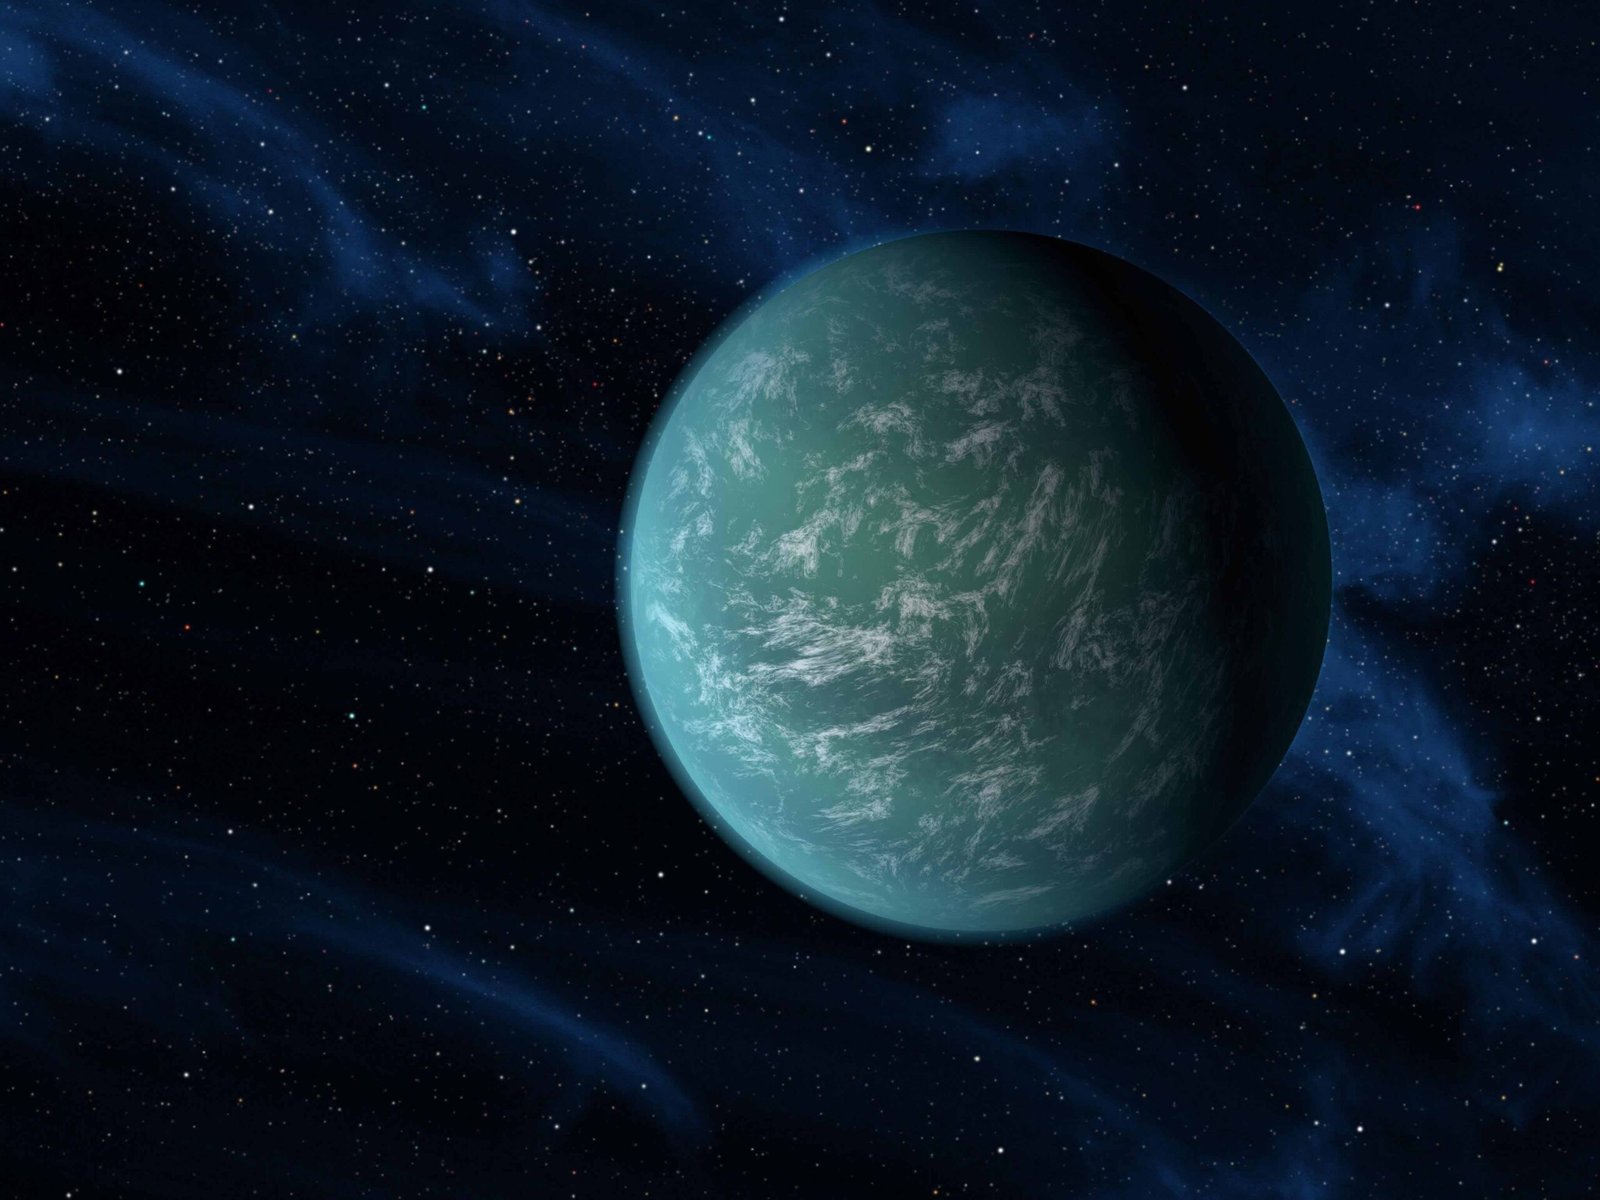 Super Earth In Space - NASA discovered Super Earth in space, know why it is special